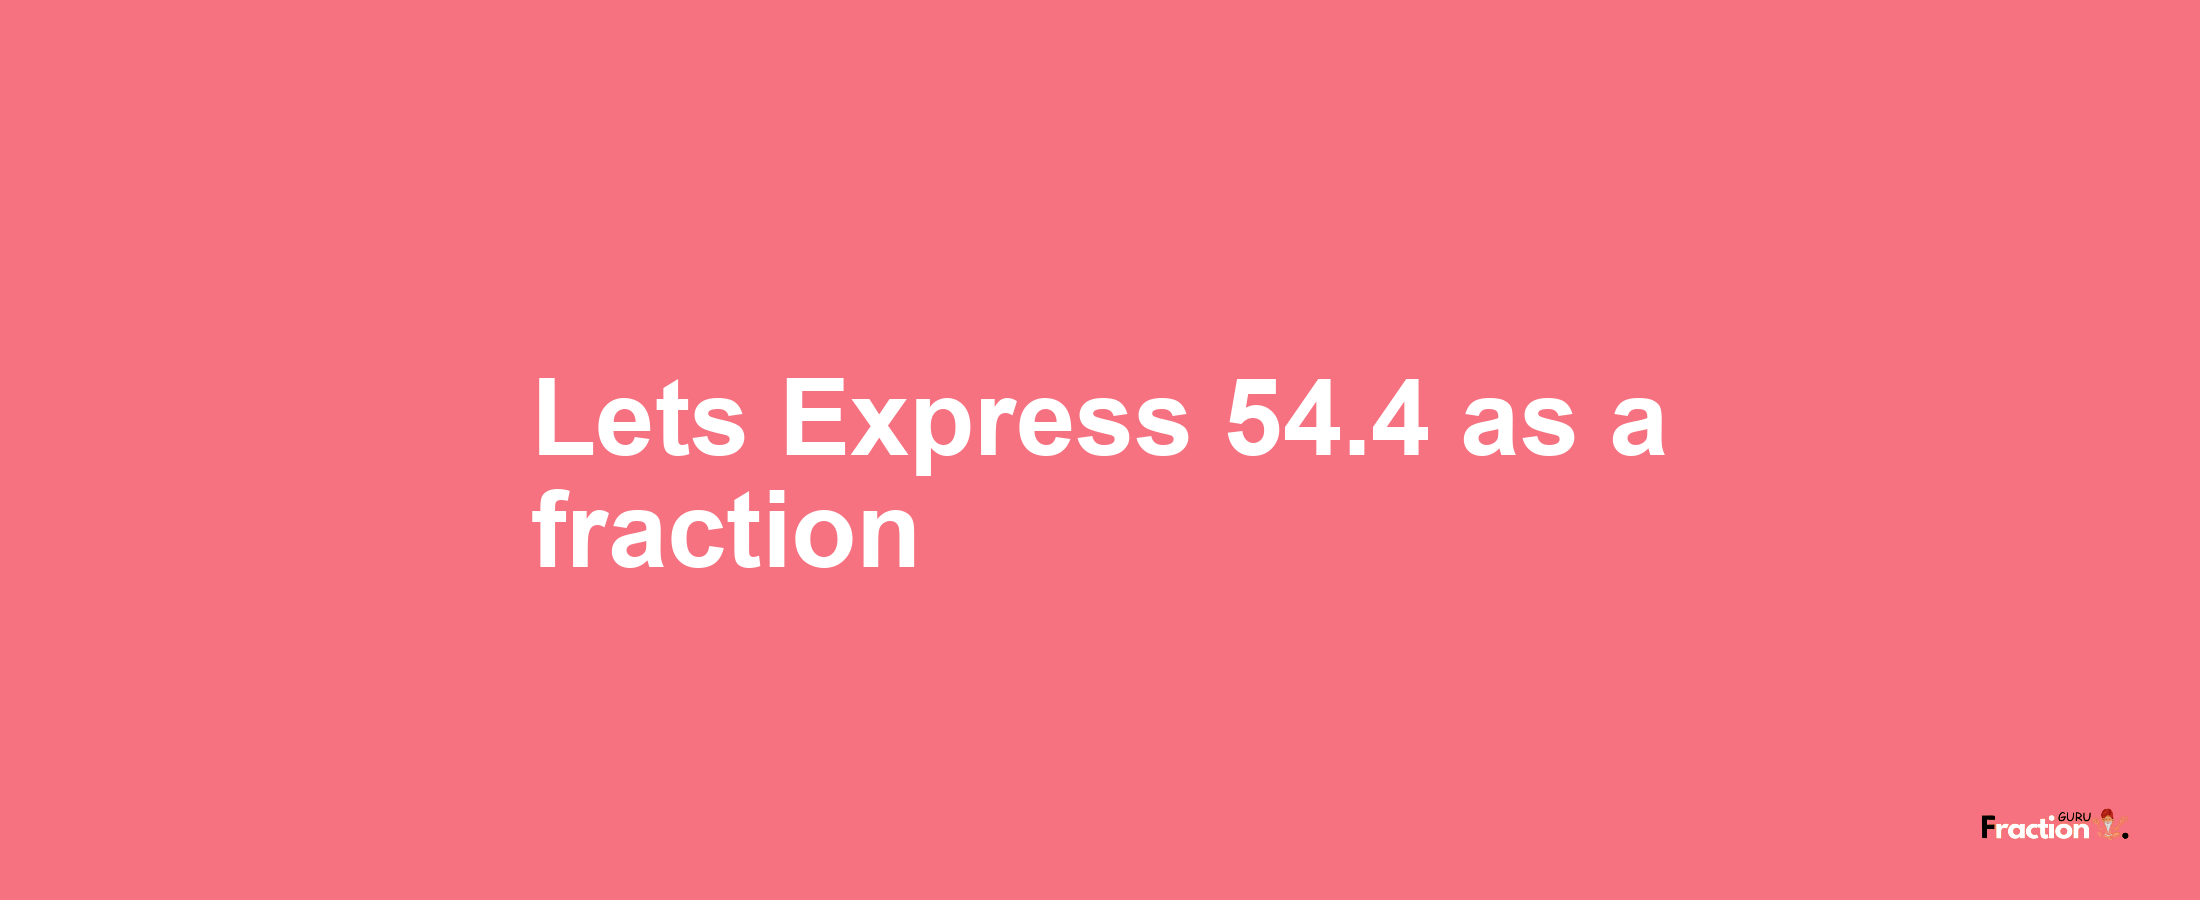 Lets Express 54.4 as afraction